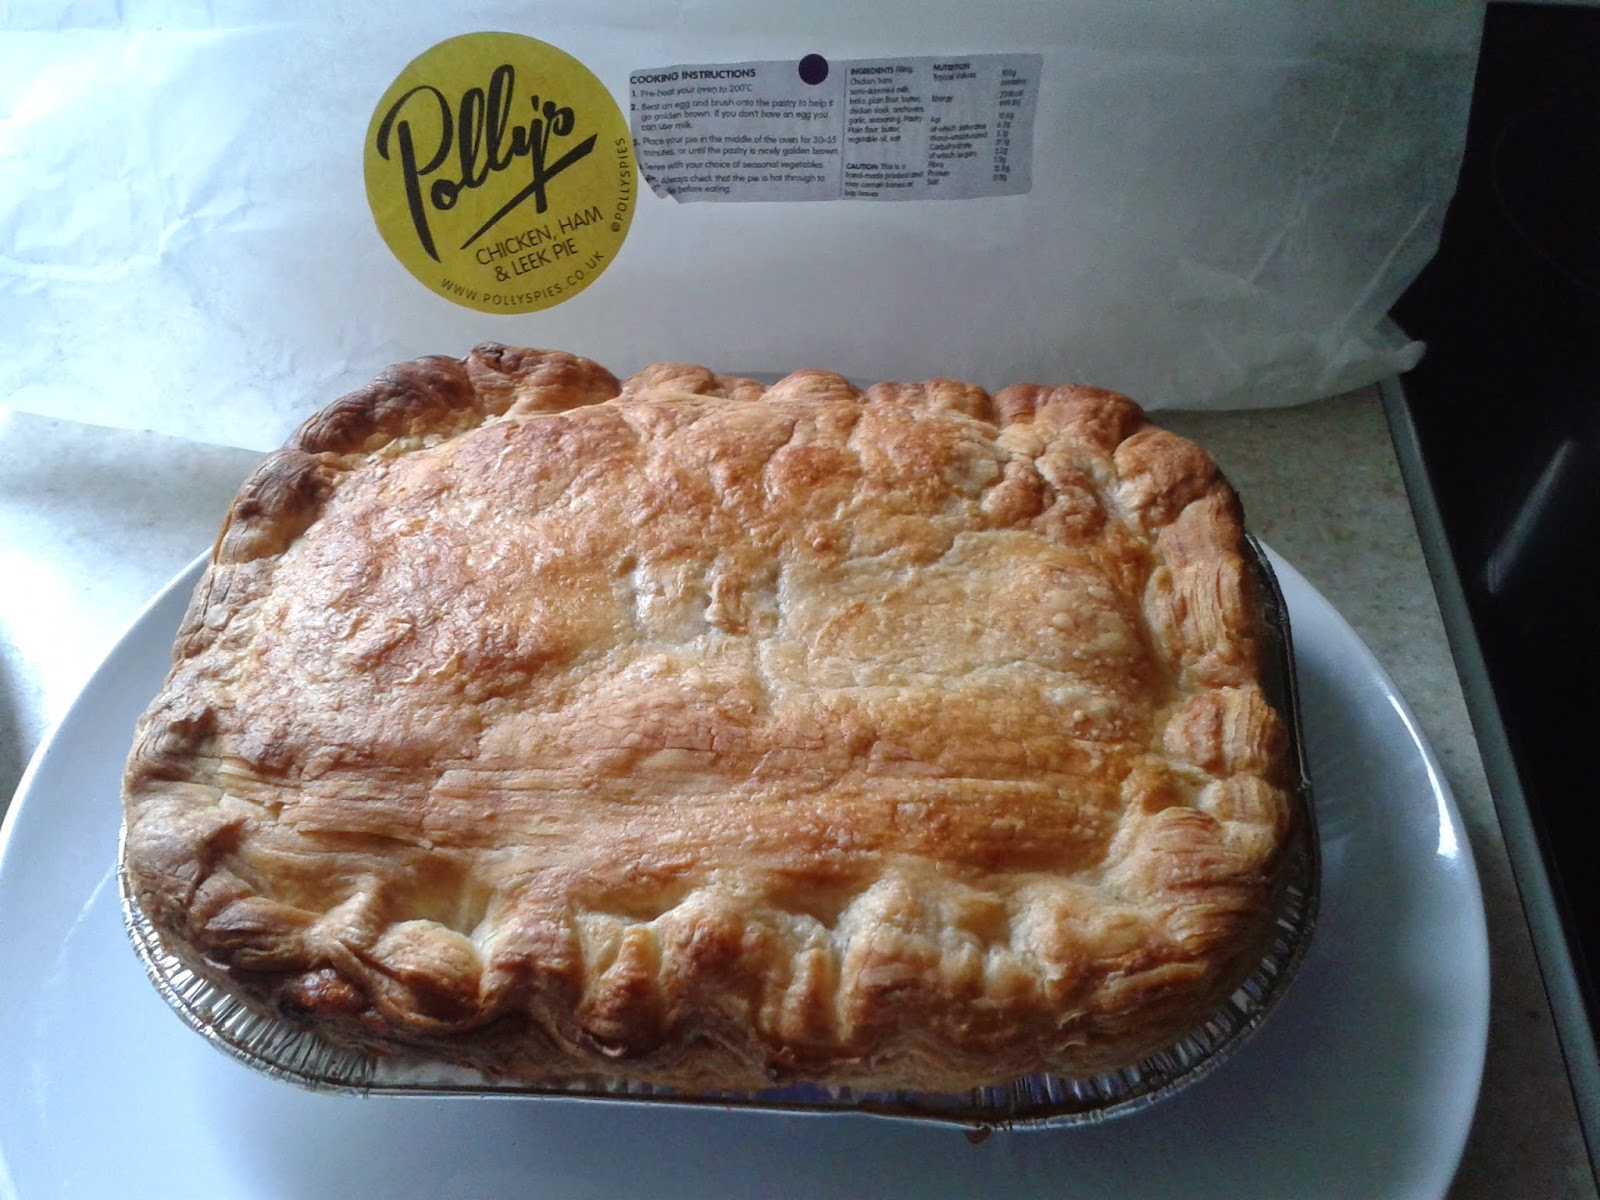 Polly's Pies Chicken Pie Review